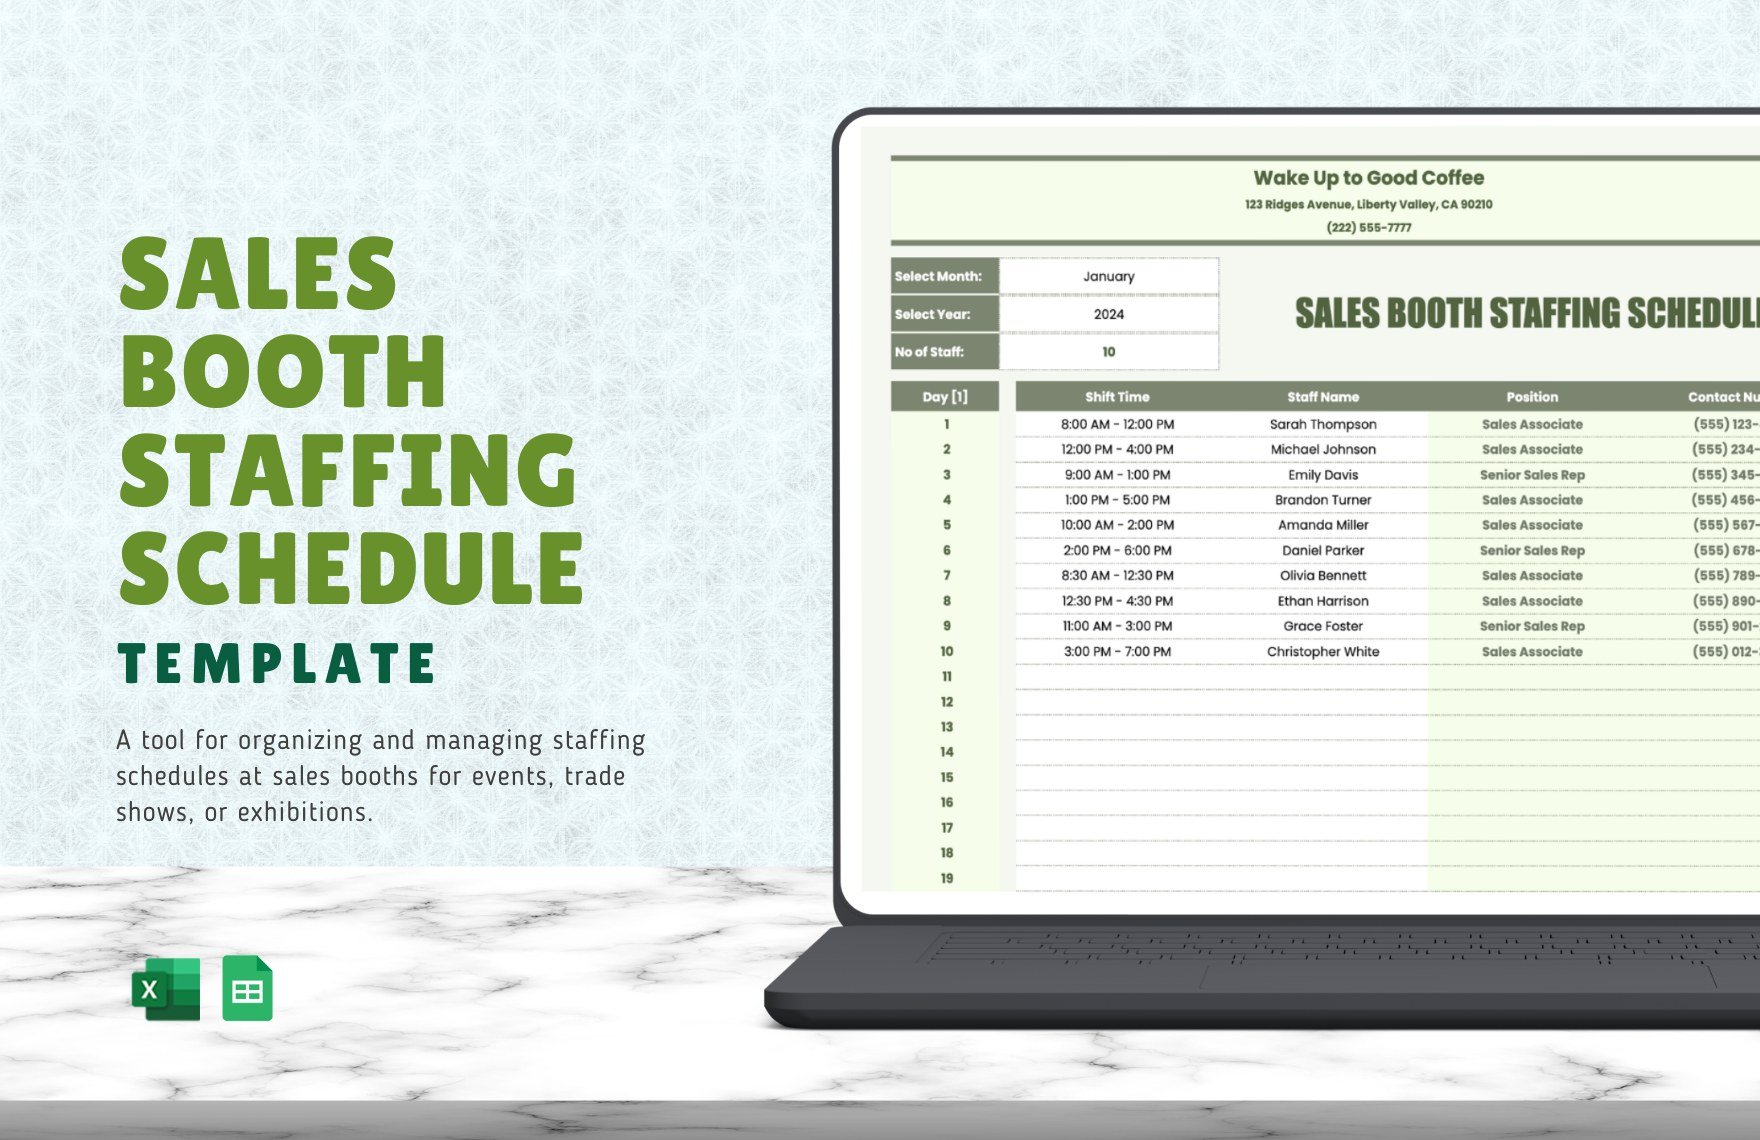 Sales Booth Staffing Schedule Template in Excel, Google Sheets